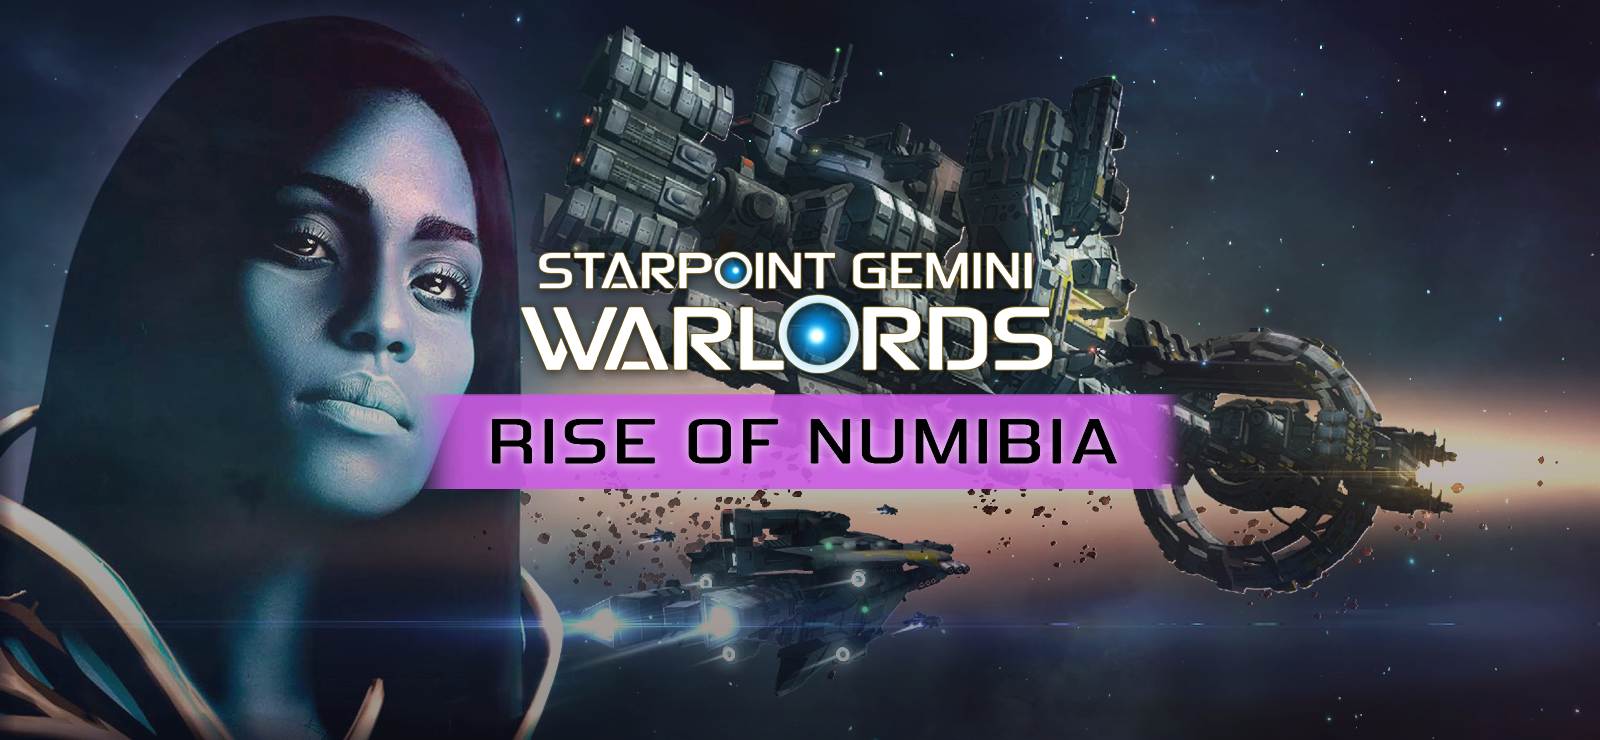 Starpoint Gemini Warlords - Rise Of Numibia